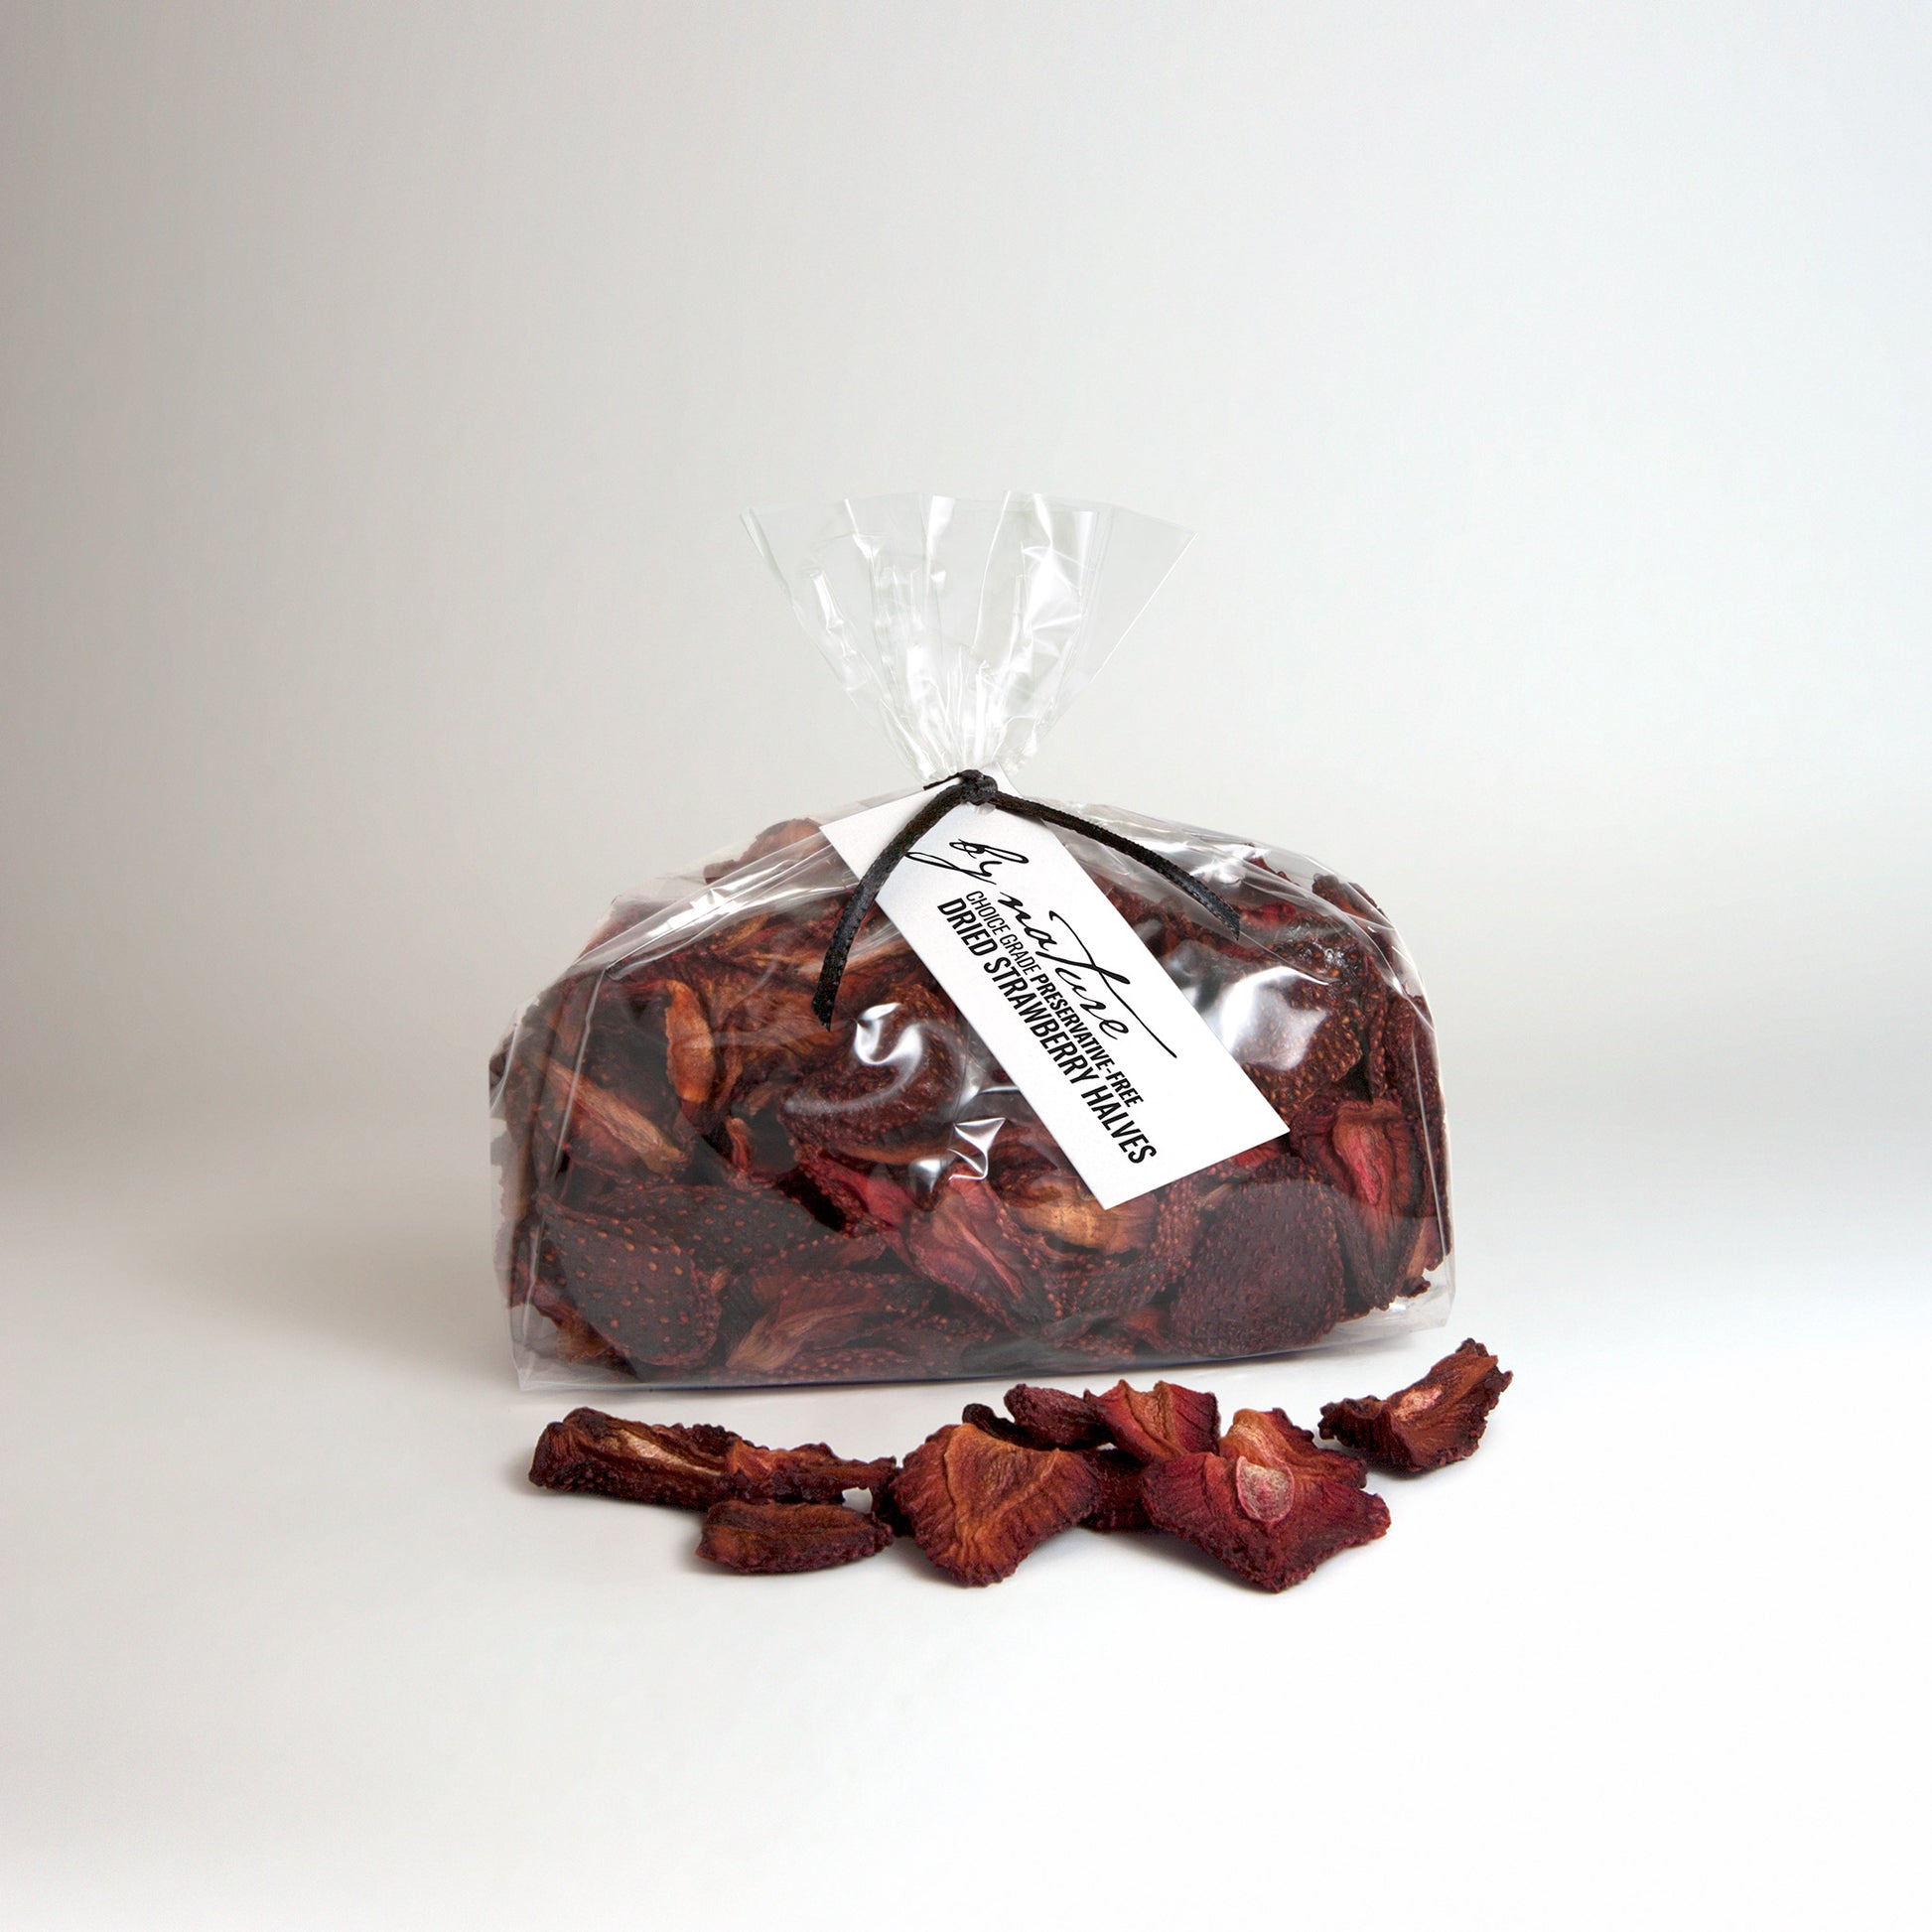 BY NATURE Dried Strawberry Halves, 250g - preservative-free.